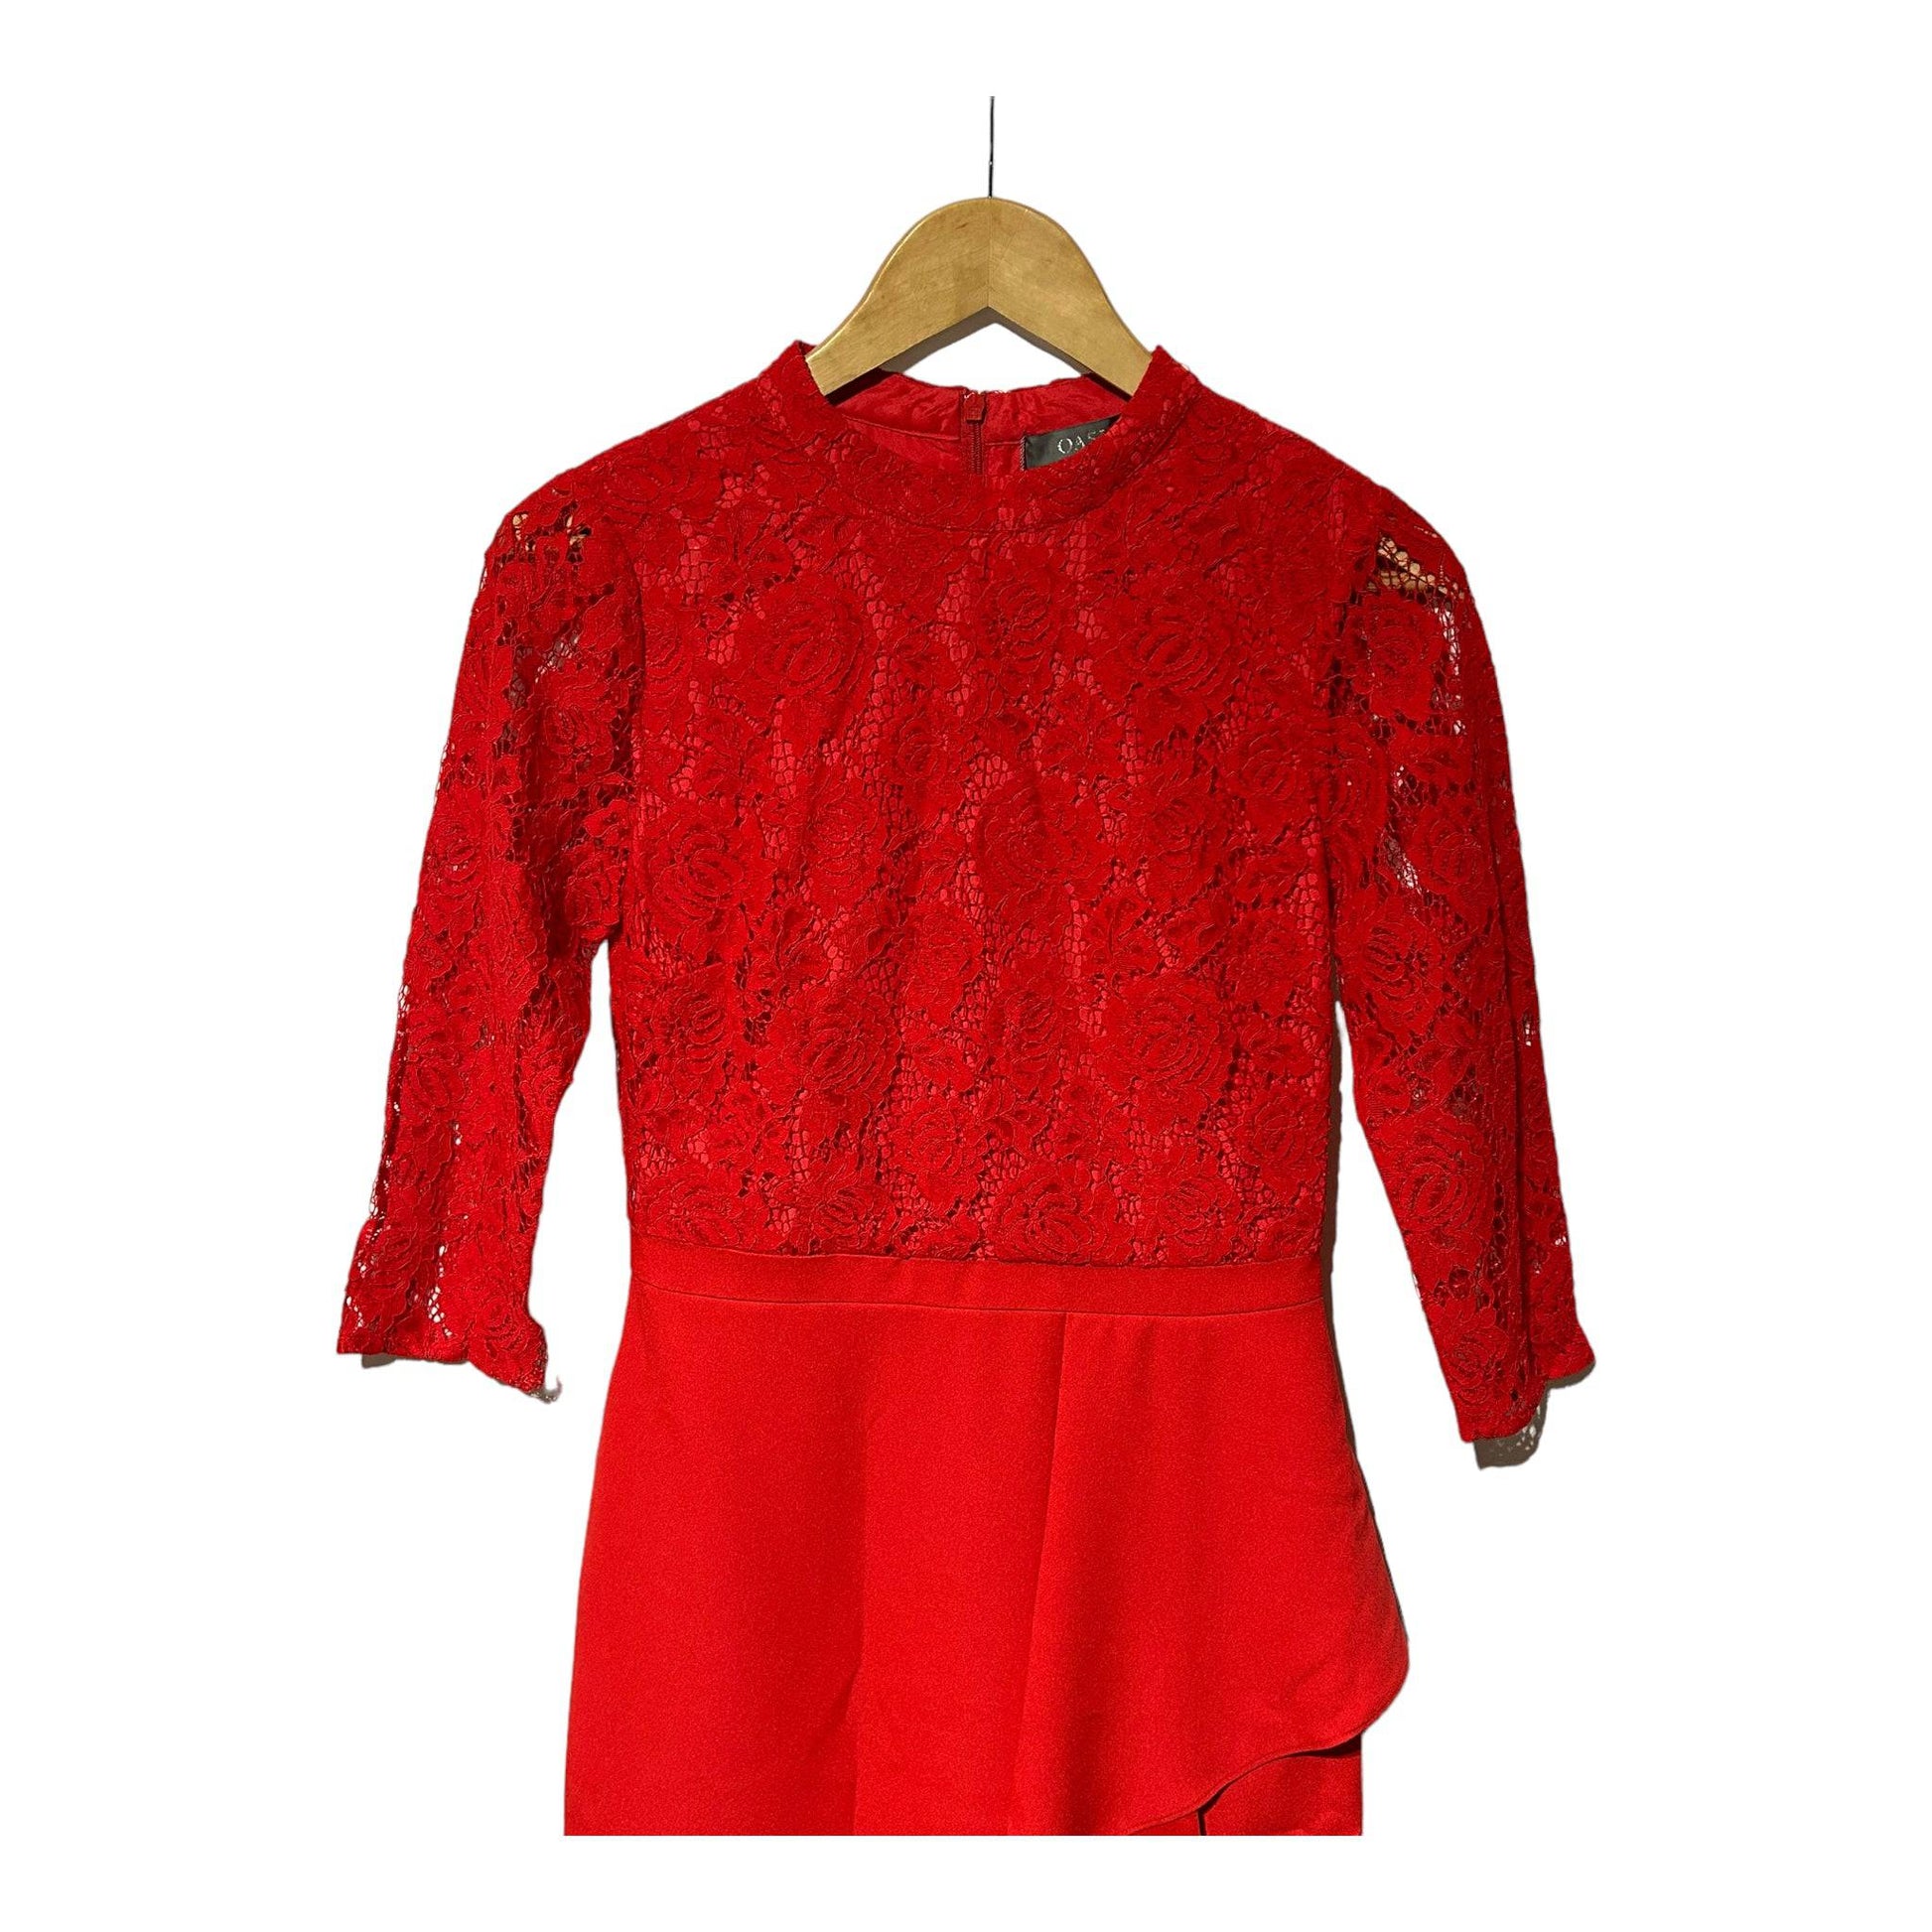 Oasis Red Lace Dress - Recurring.Life